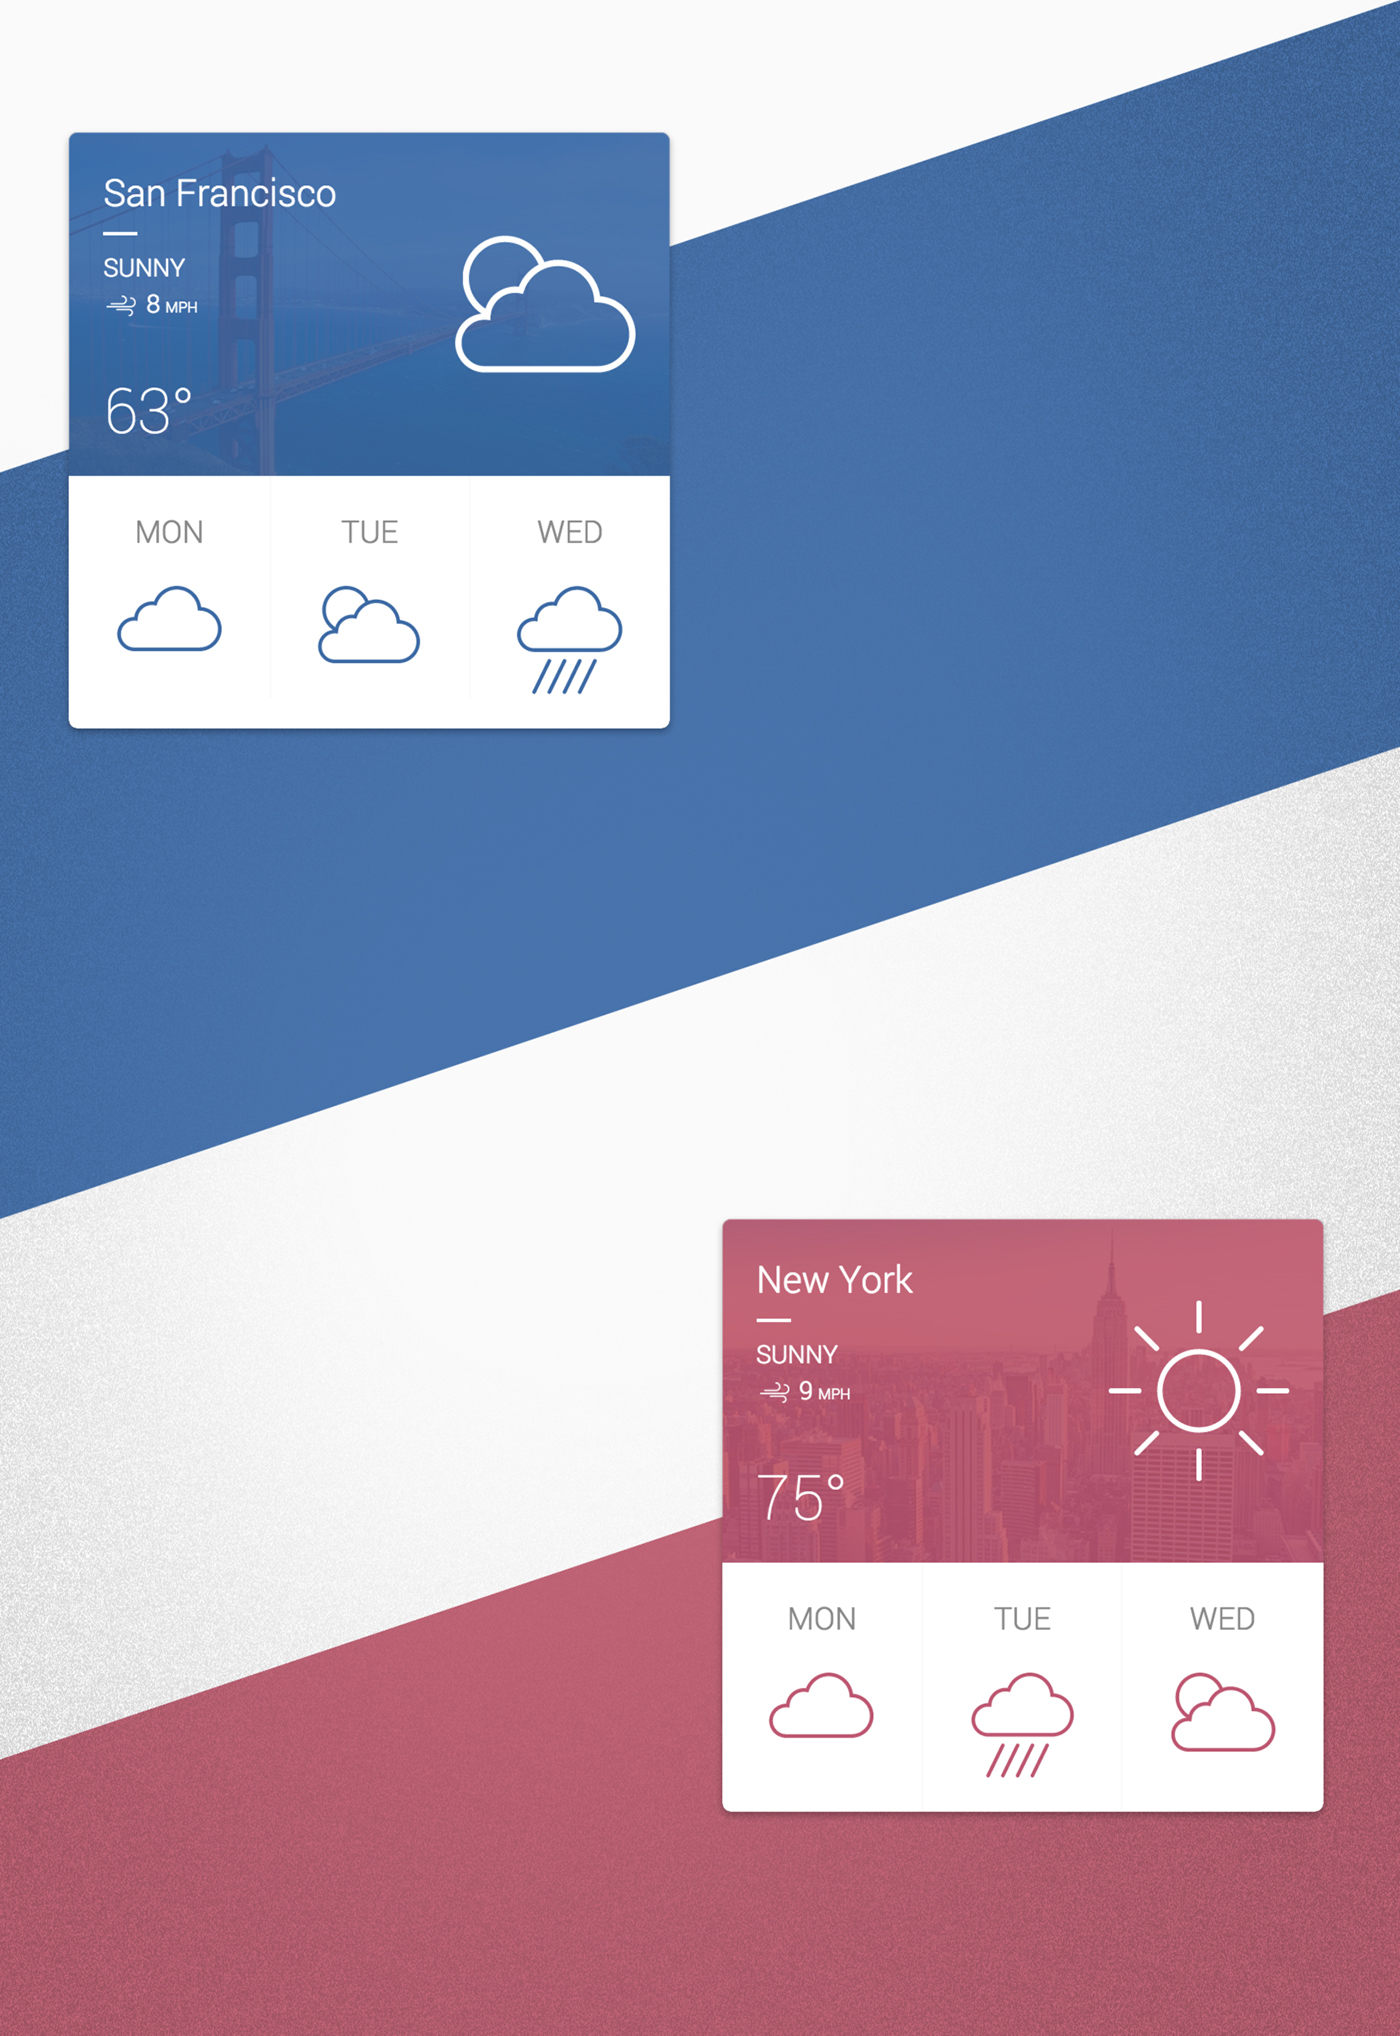 CSS3 + SVG - Material Design Weather Card Animation on Behance